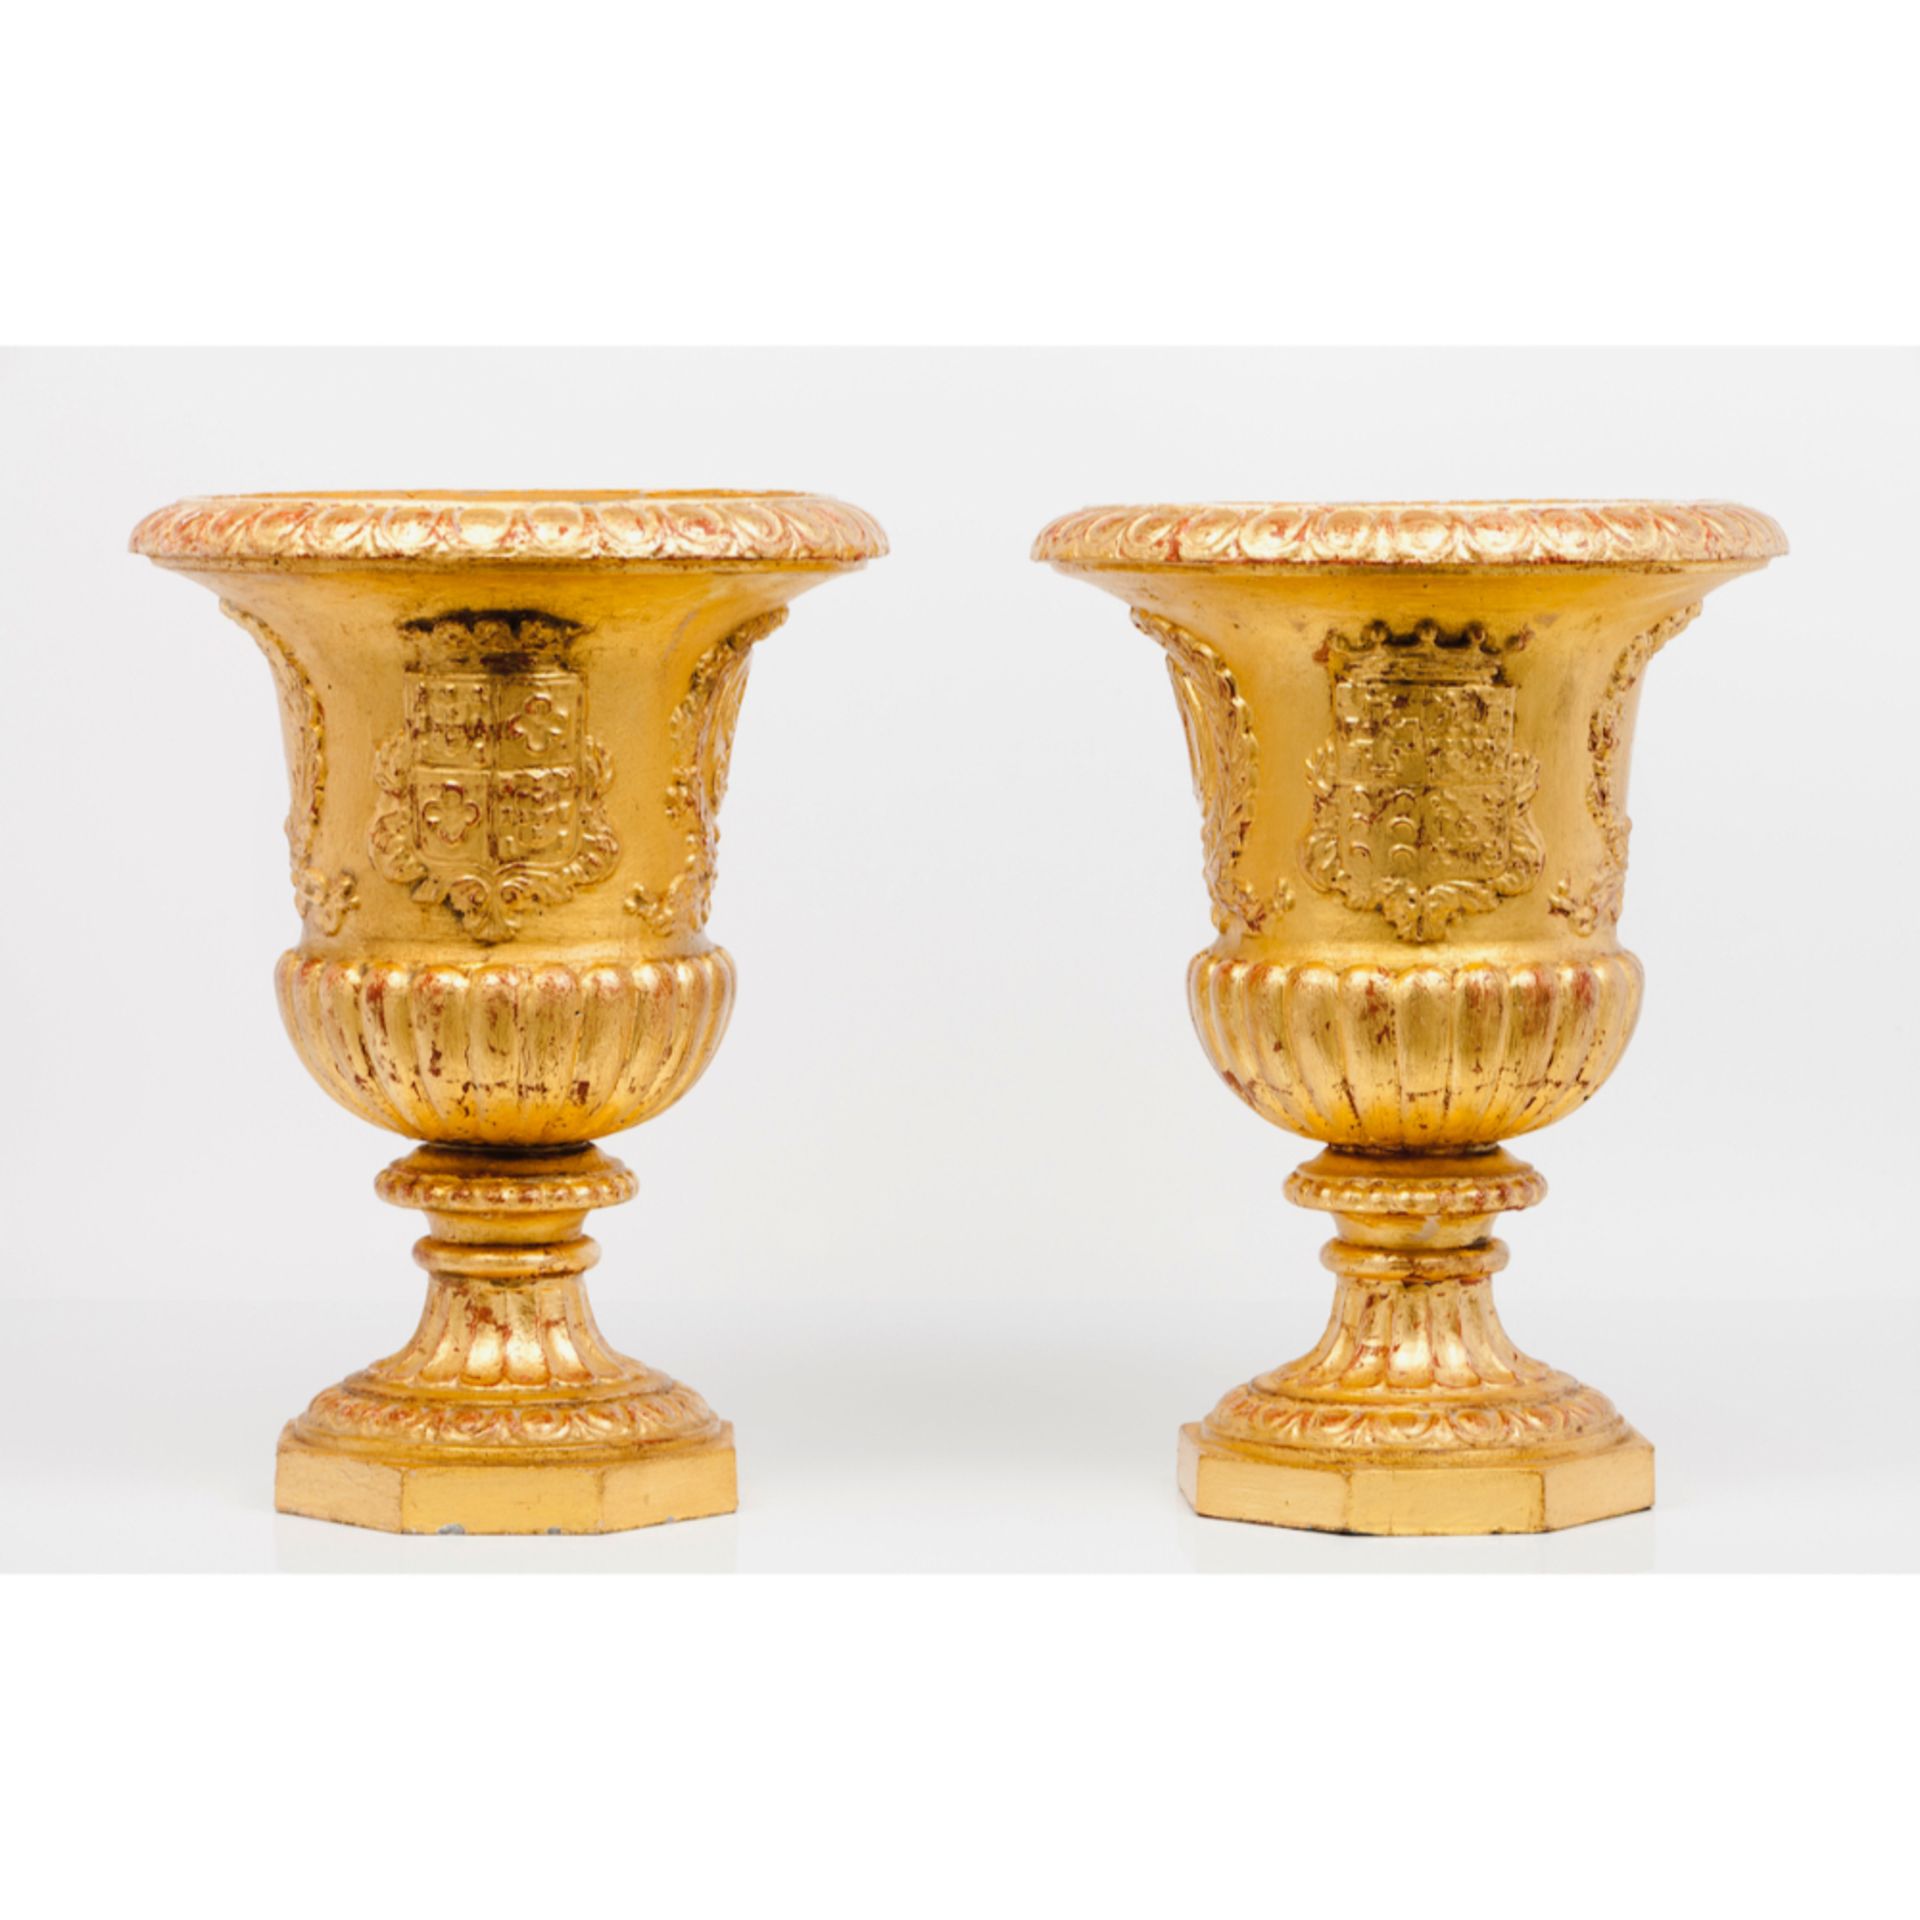 A pair of cachepotsGilt bronze Engraved with heraldic shields for the Count of Póvoa and the Duke of